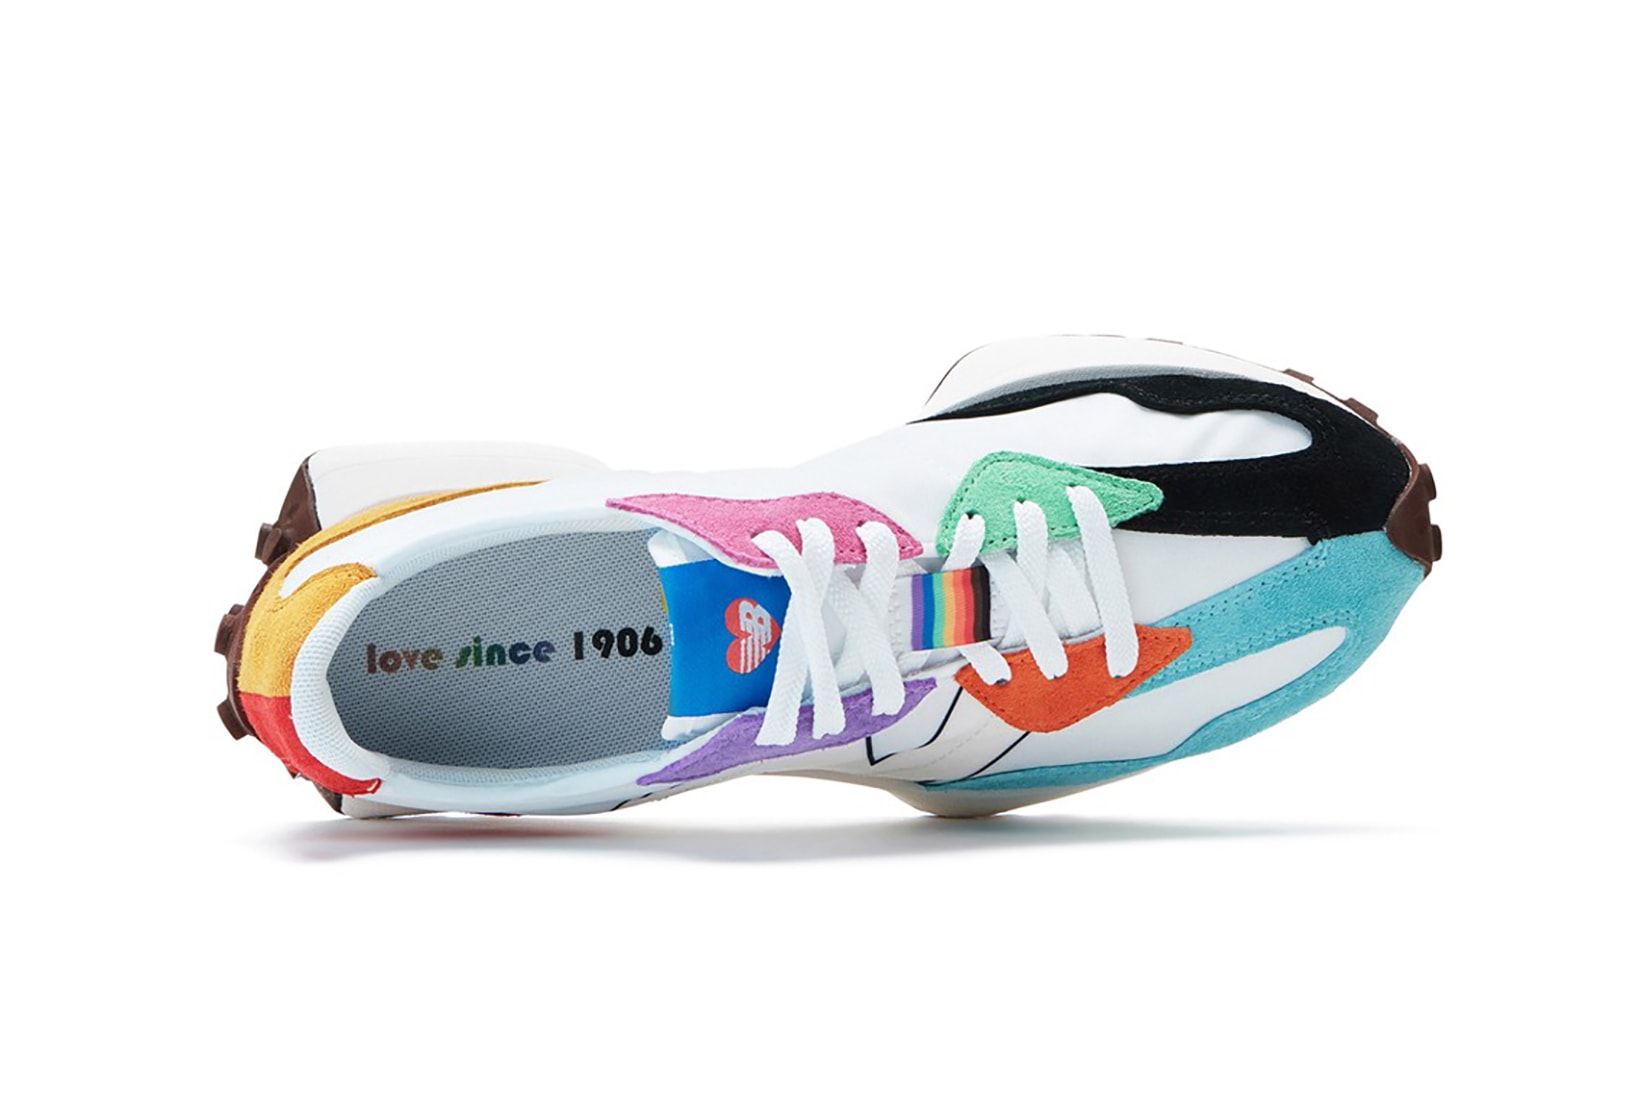 new balance pride lgbtq pack collection 327 fuelcell echo sneakers rainbow colorway white blue red purple orange green shoes footwear sneakerhead